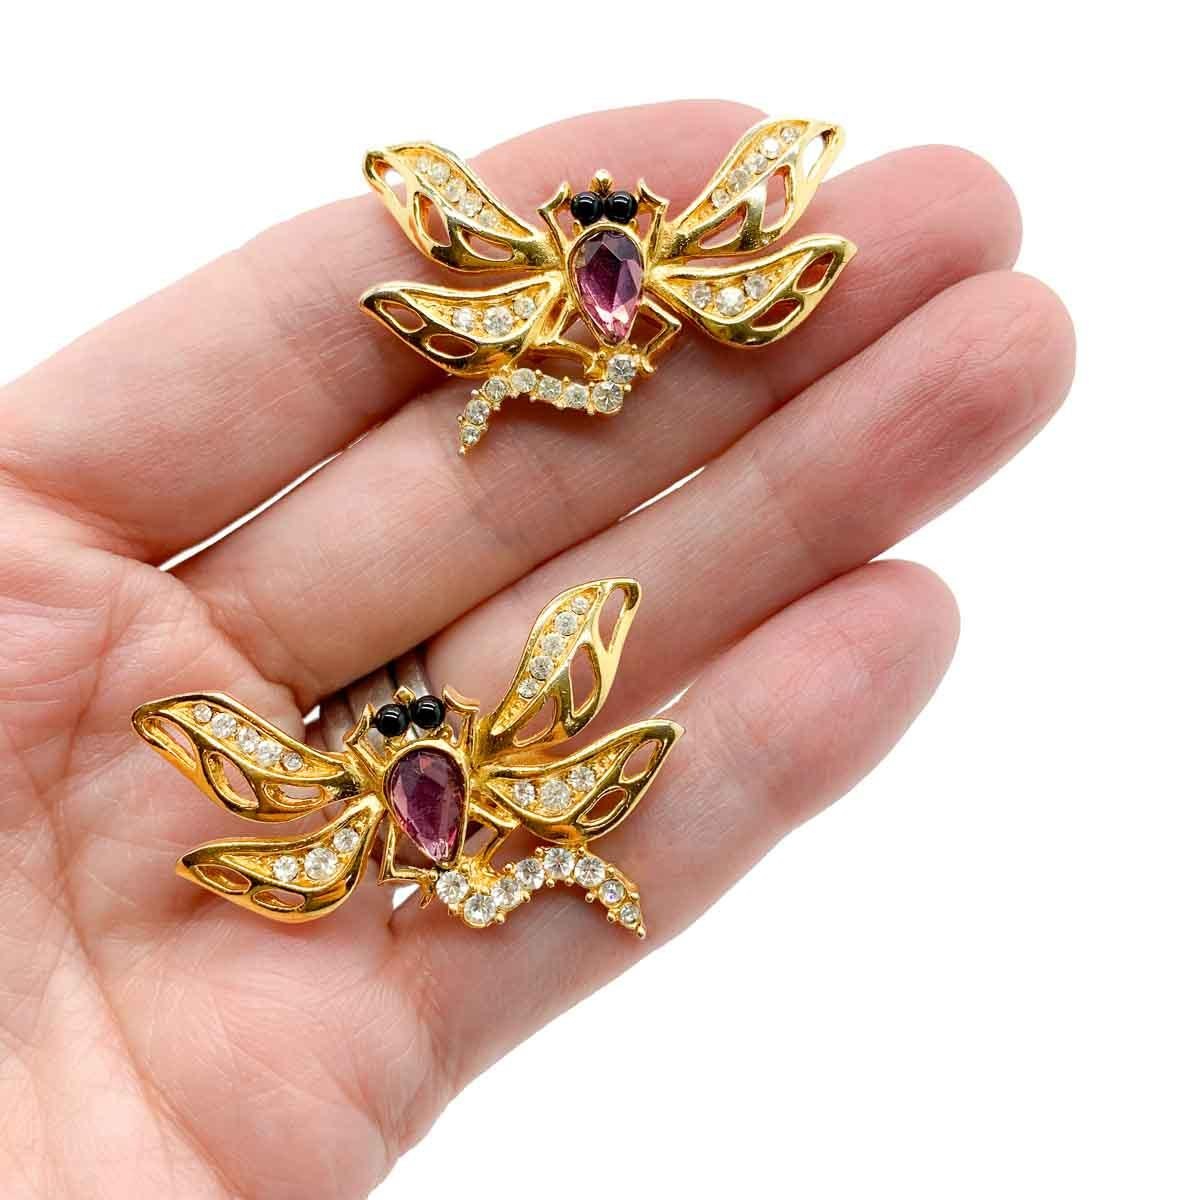 A pair of delightful vintage Givenchy dragonfly earrings. Featuring a dragonfly in flight with outstretched wings and embellished with black, amethyst and clear glass stones.
Vintage Condition: Very good without noteworthy wear.  Please note, the